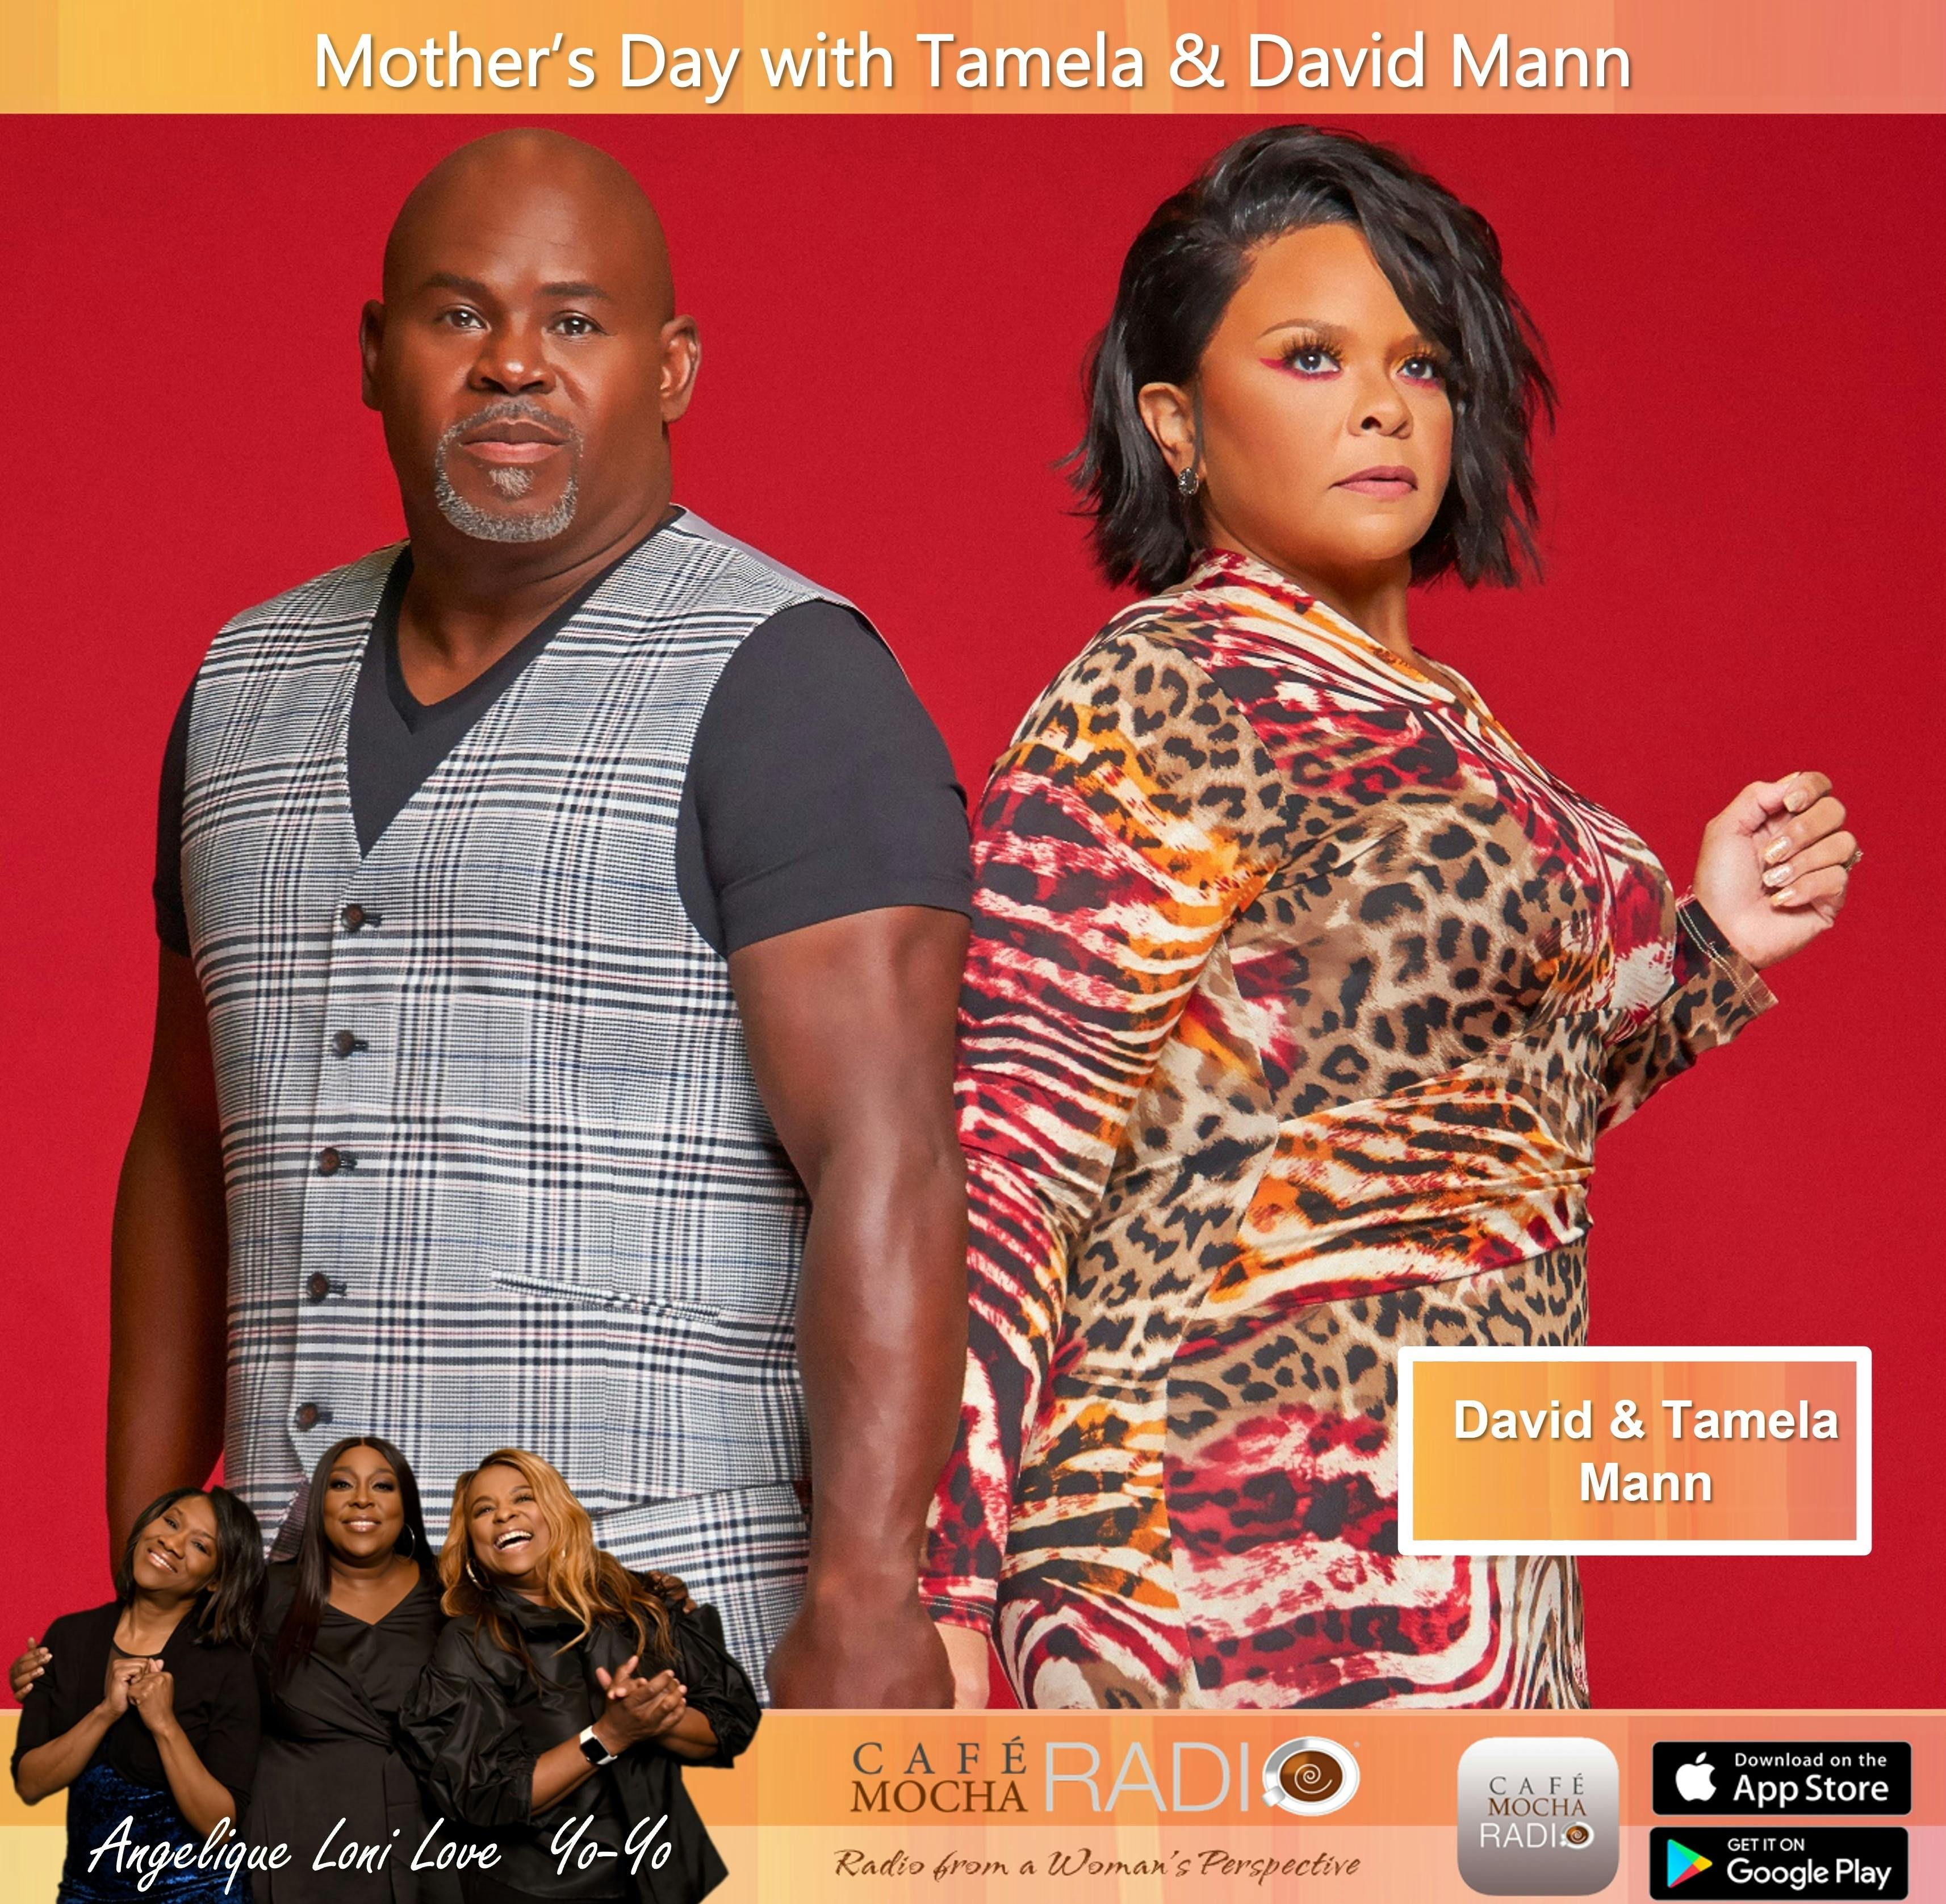 Mother's Day with Tamela & David Mann